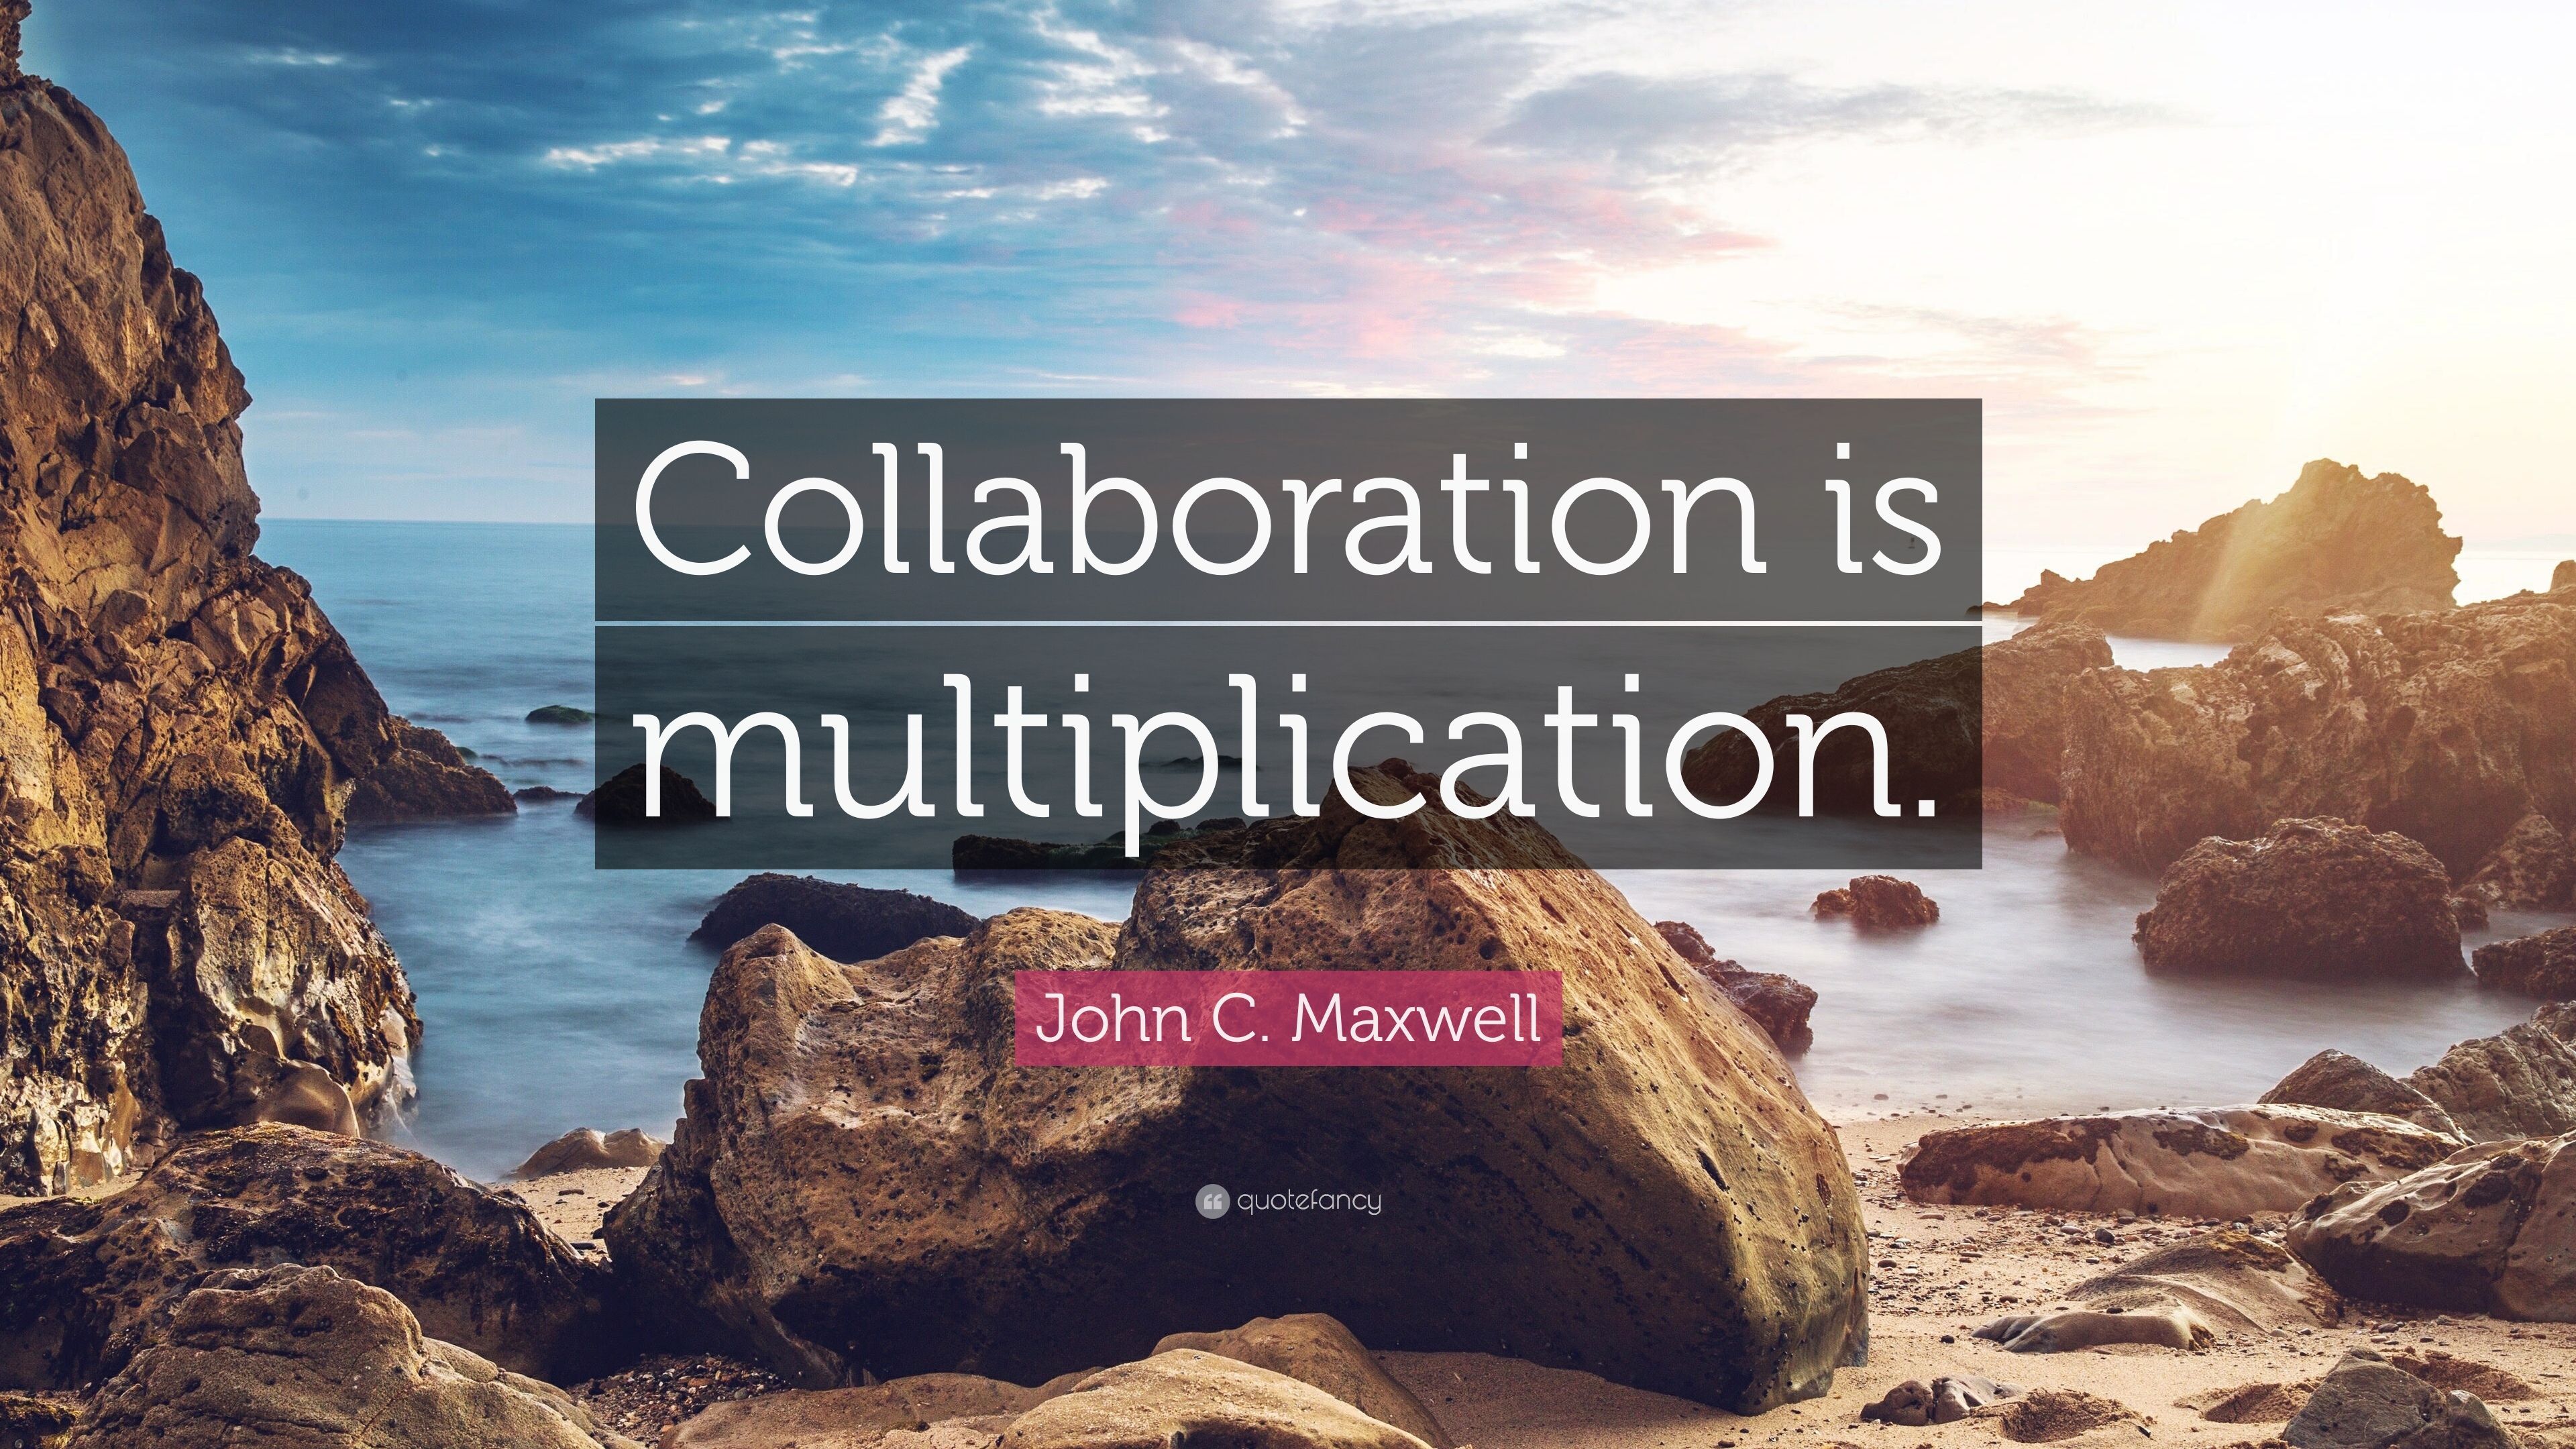 John C. Maxwell Quote: “Collaboration is multiplication.” (12 wallpaper)